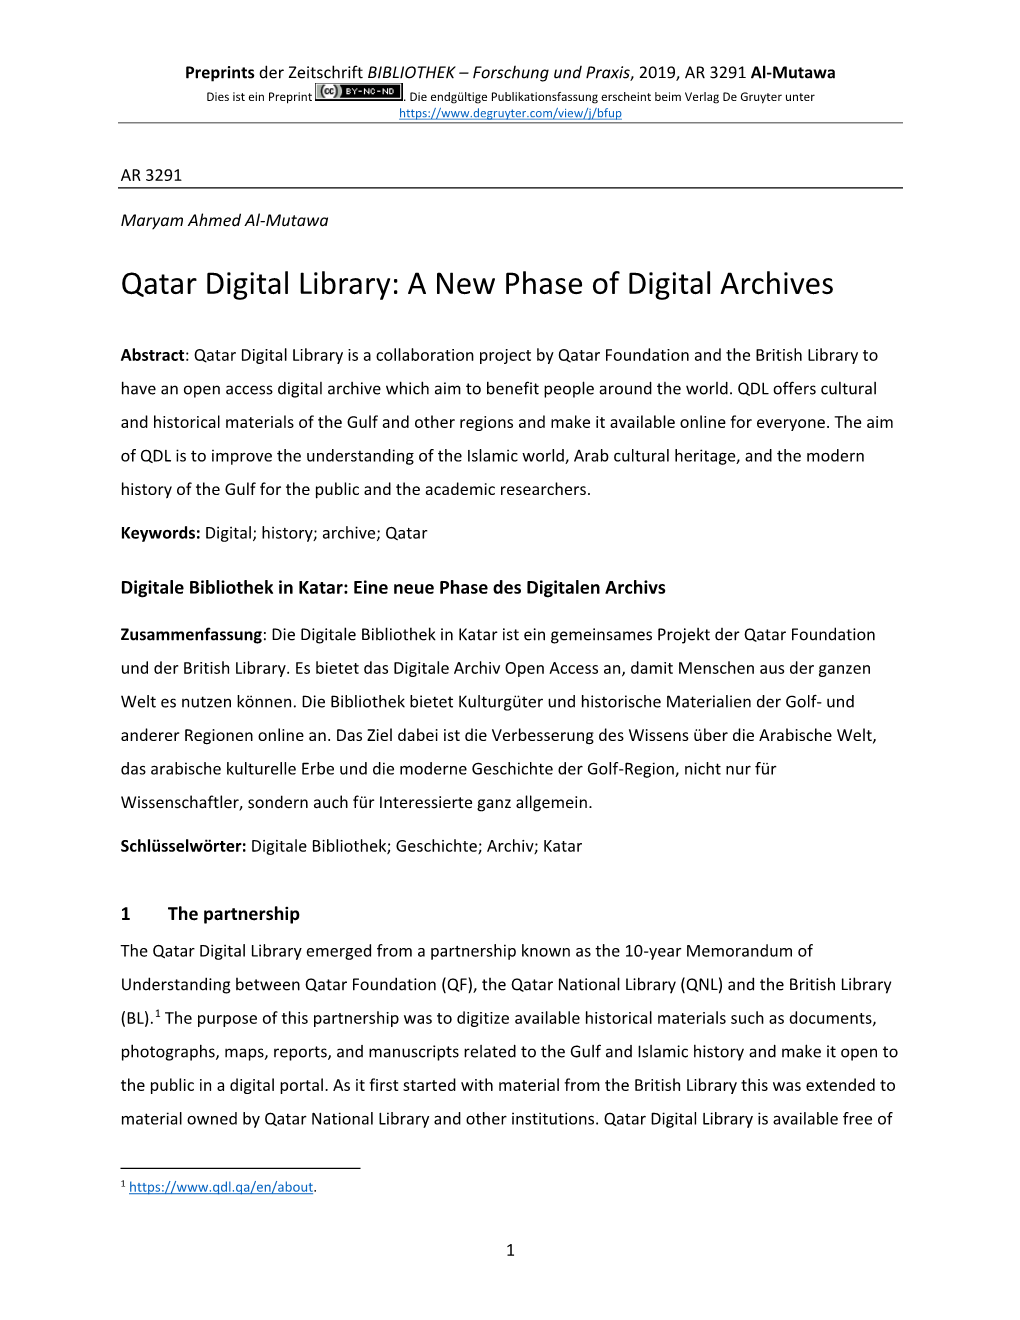 Qatar Digital Library: a New Phase of Digital Archives